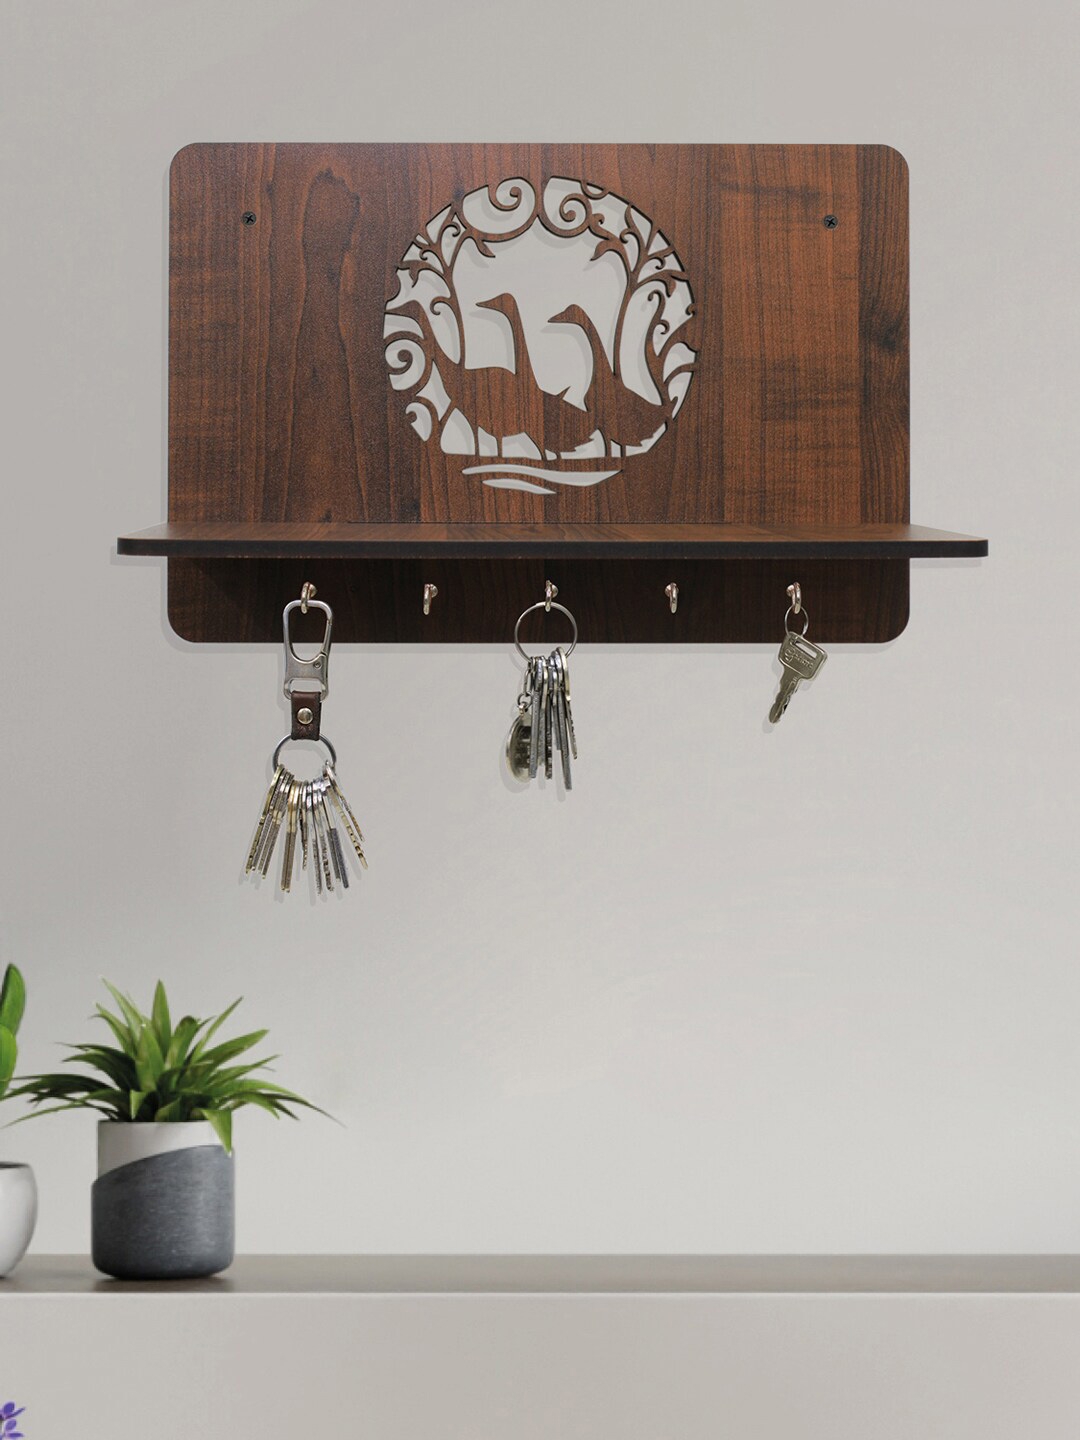 RANDOM Brown Textured MDF Wooden Wall Shelf with Key Holders